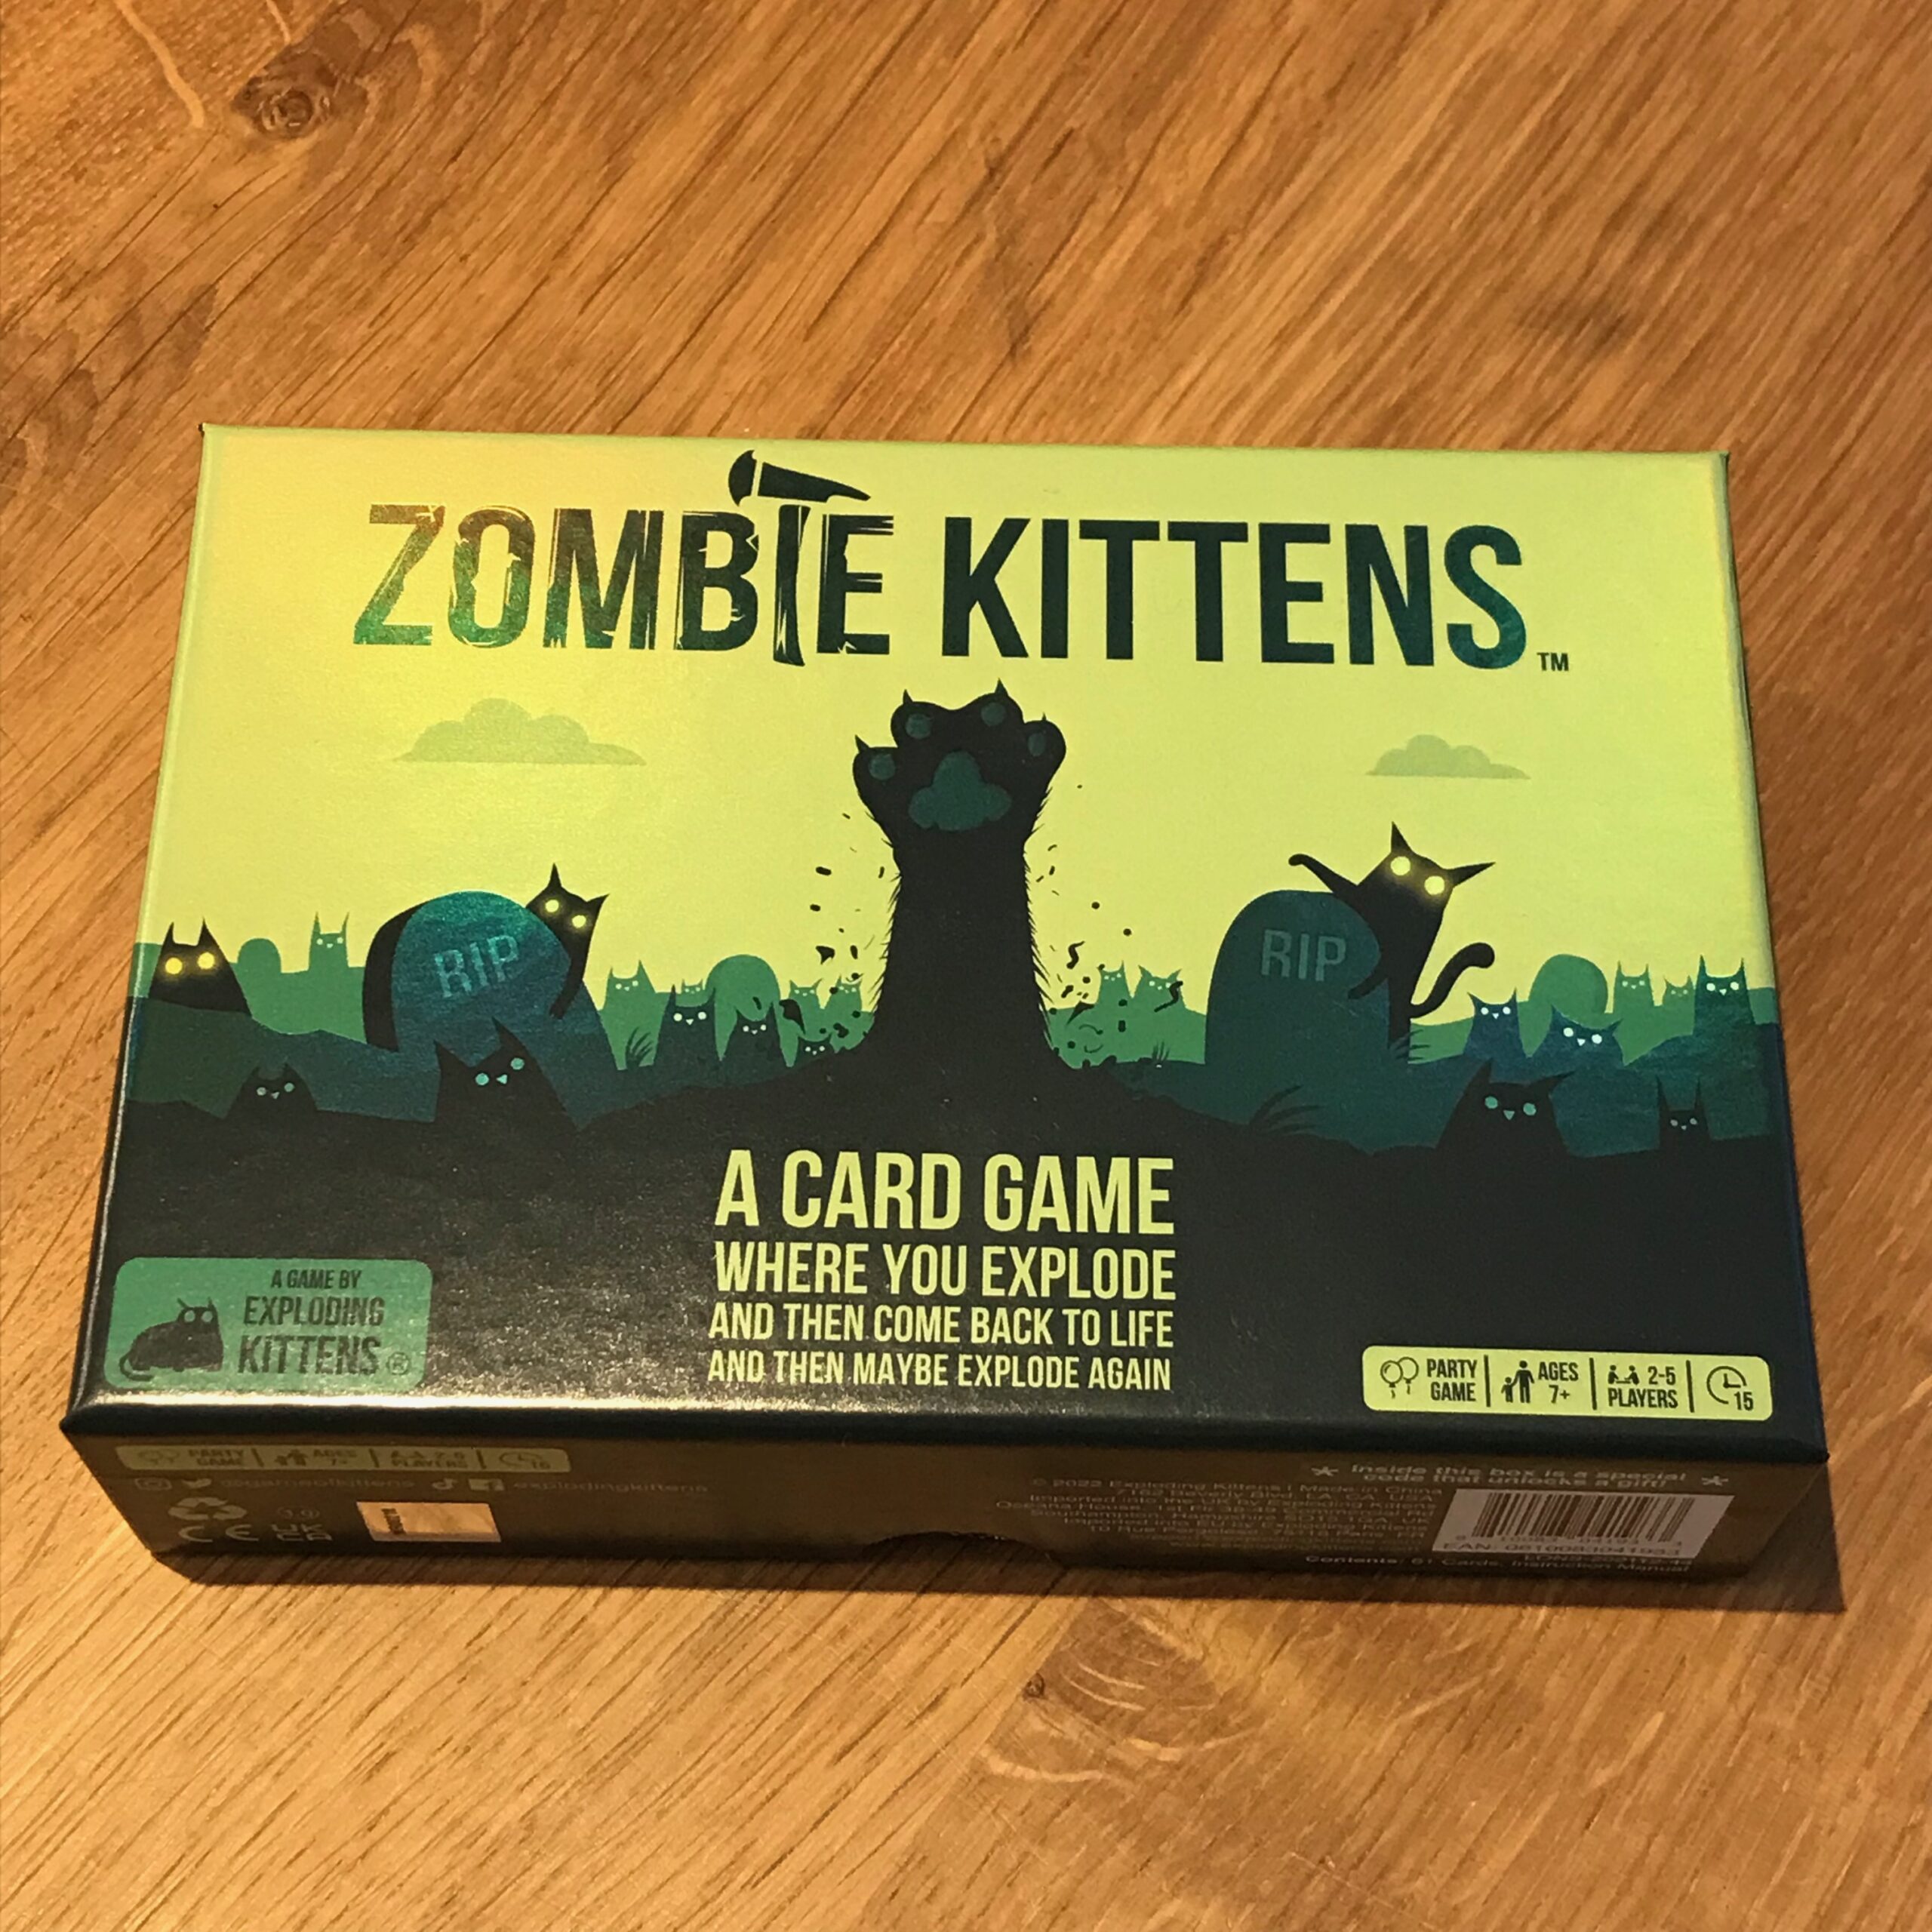 Zombie Kittens - Exploding Kittens coming back to life! - Penny Plays